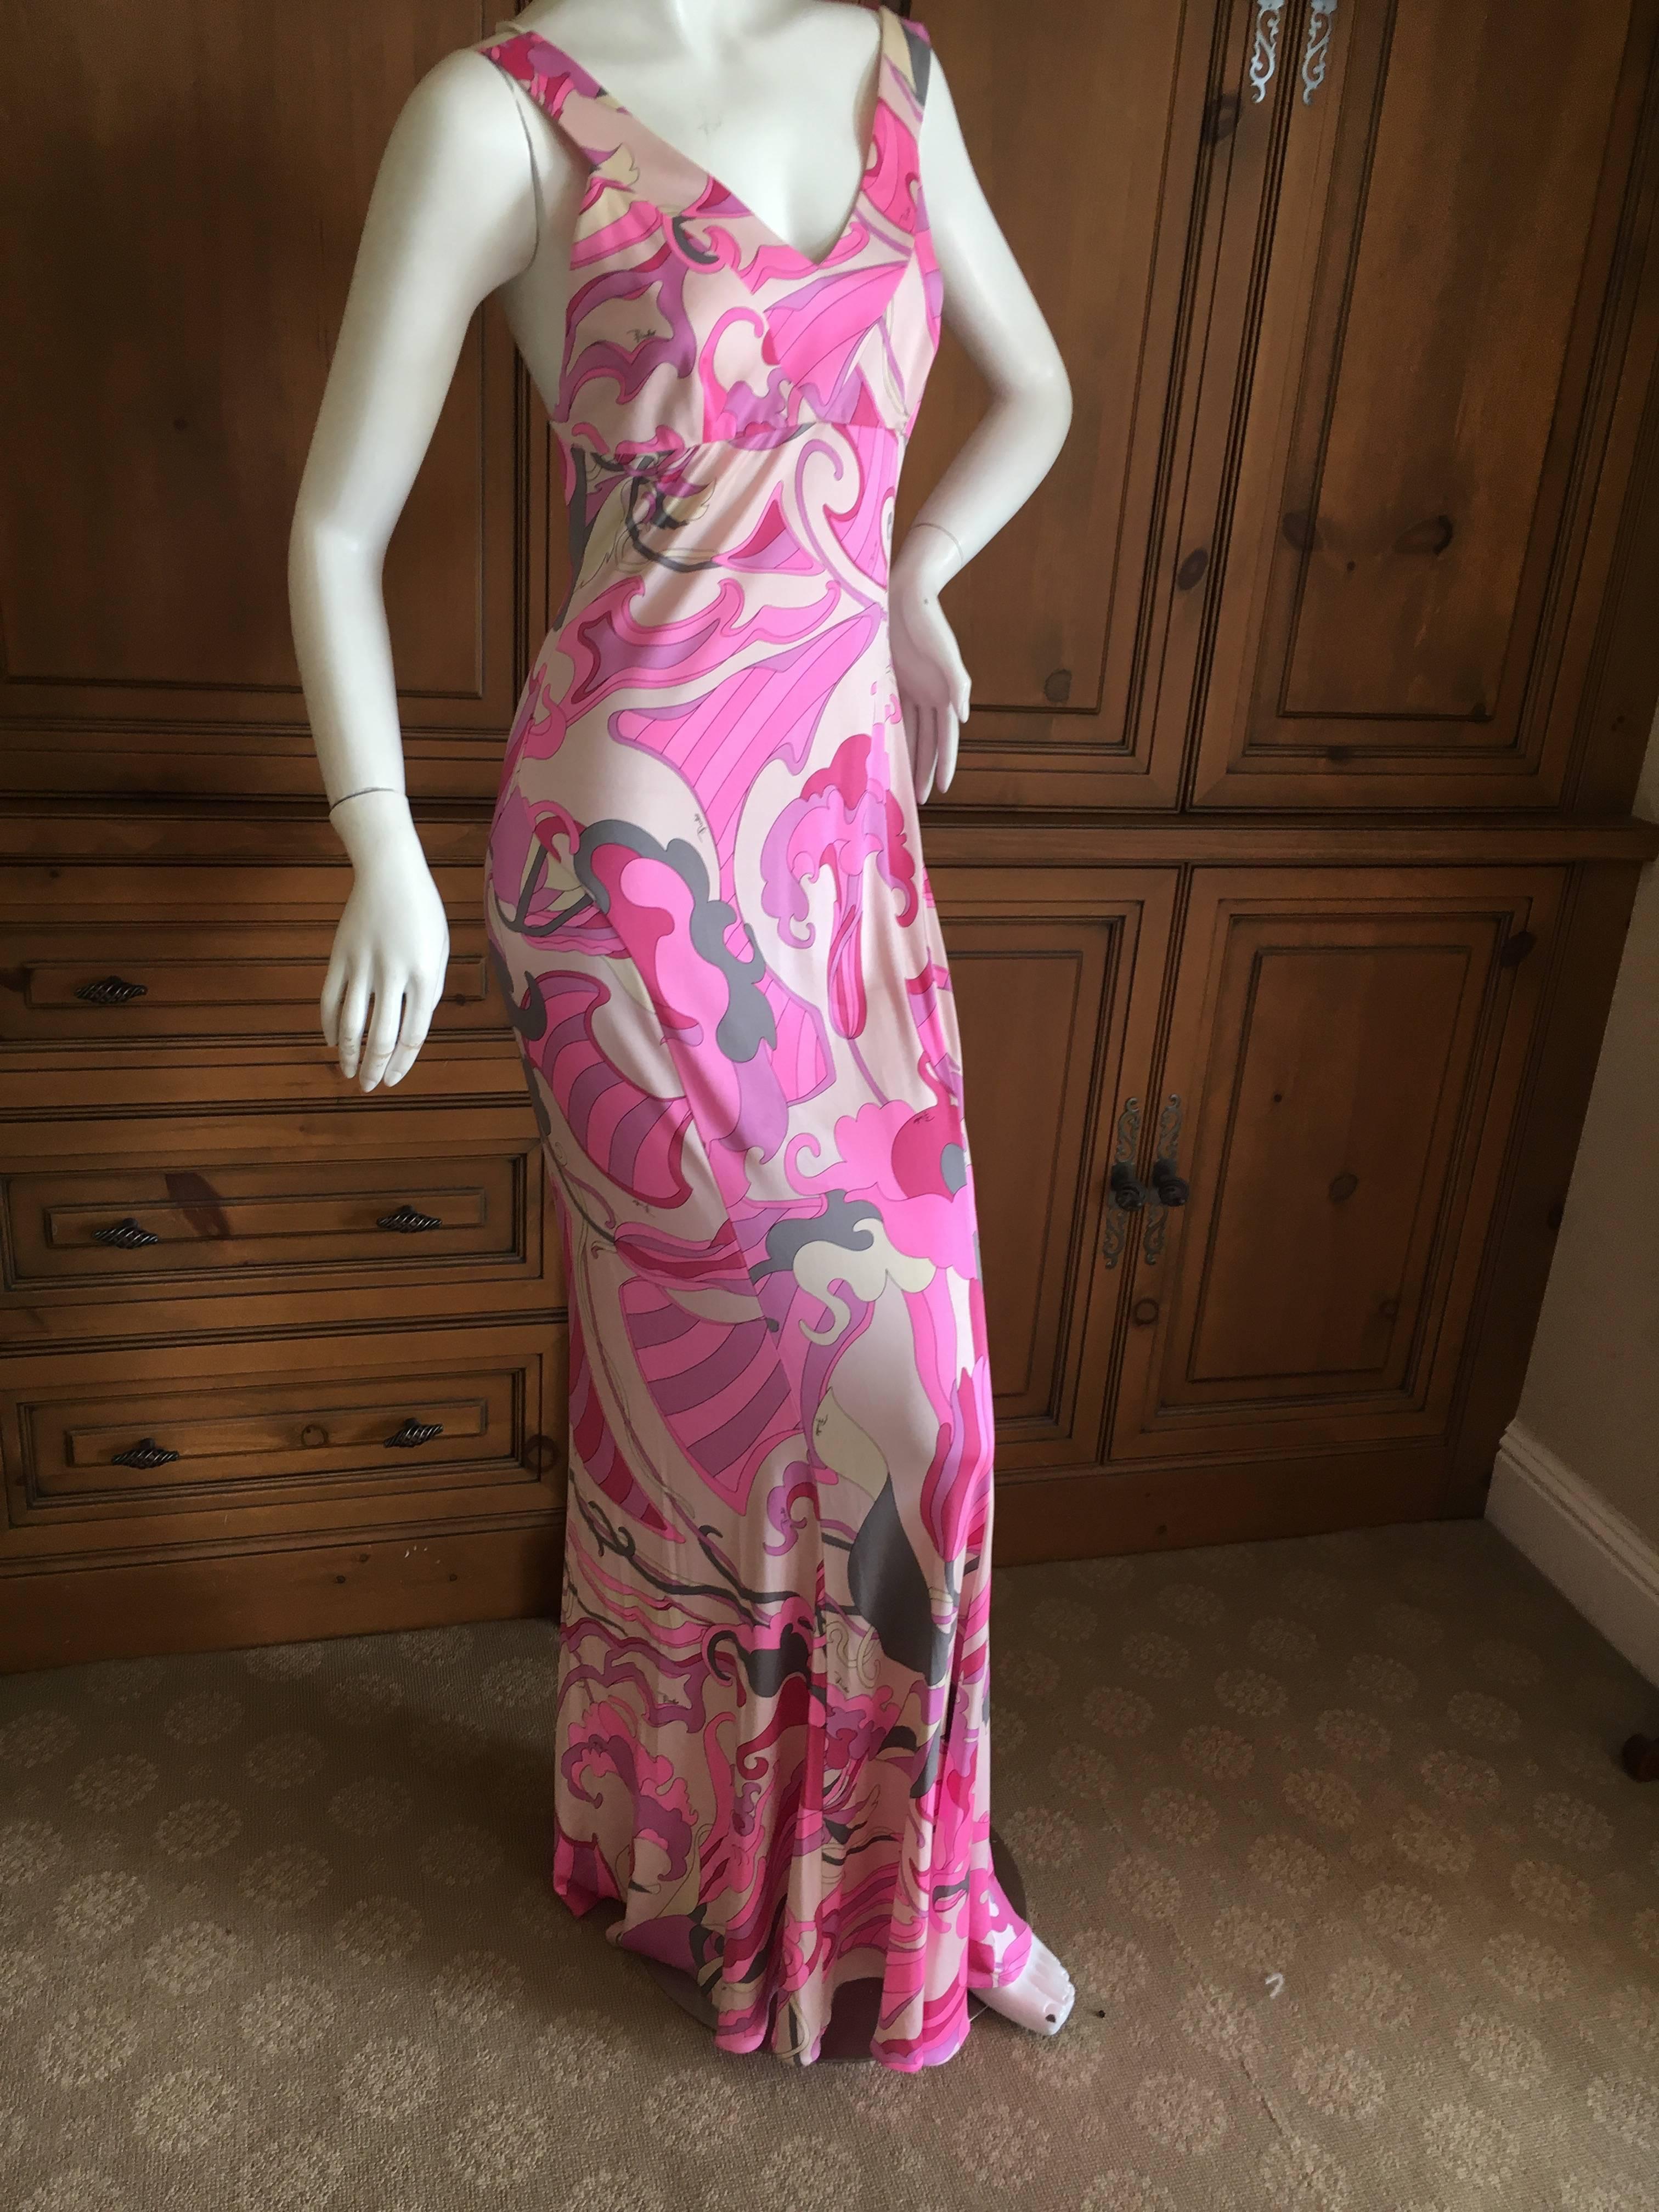 Beautiful pink pattern viscose maxi dress from Emelio Pucci.
New with tags
Size 40
Bust 36